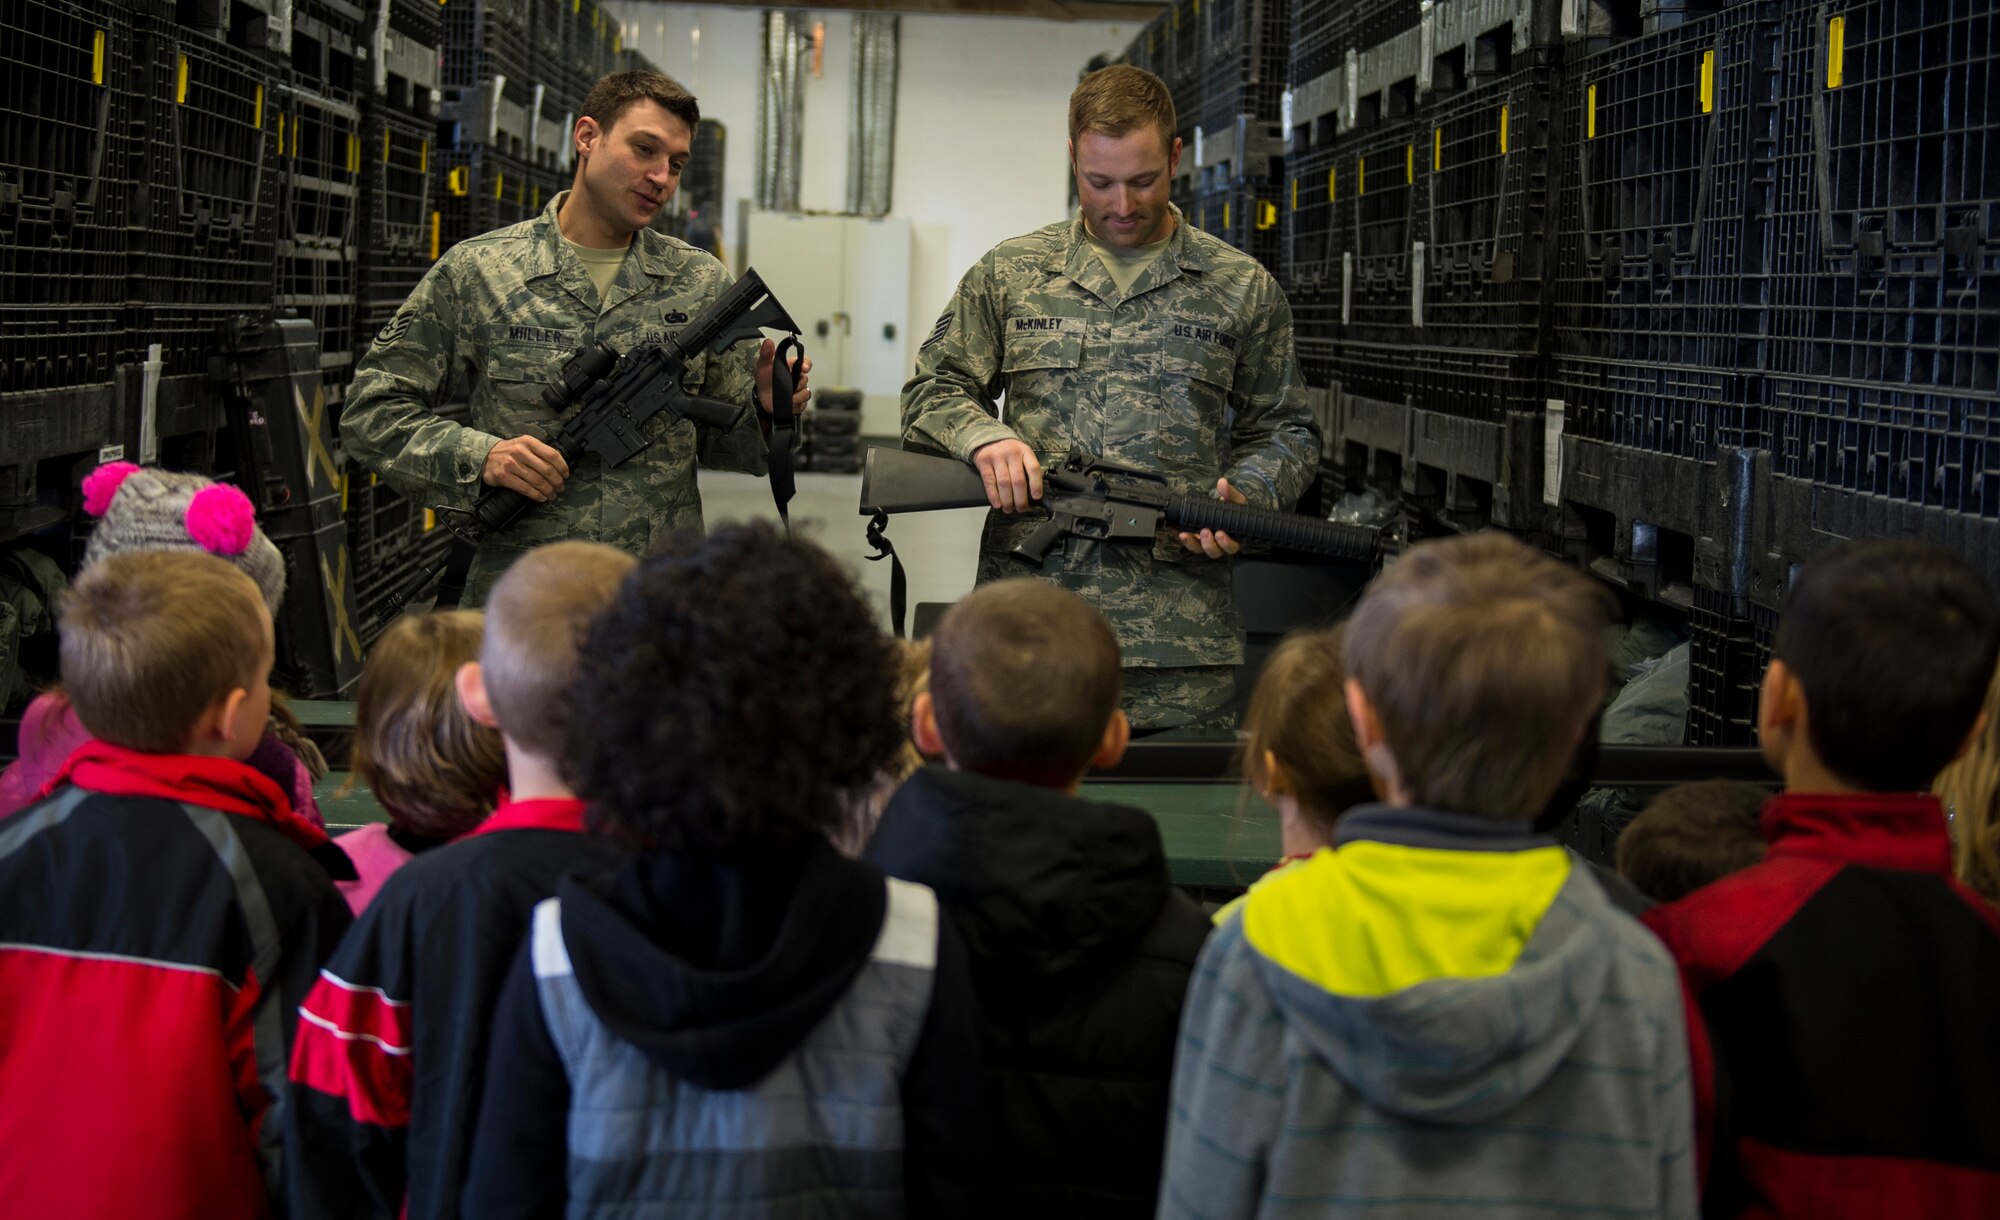 U.S. Air Force Staff Sgt. Shaun Miiller, left, and U.S. Air Force Staff Sgt. Kelley McKinley, both 52nd Logistic Readiness Squadron individual protective equipment supervisors, demonstrate weapon safety to students from Spangdahlem Elementary during Kids’ Deployment Day at Spangdahlem Air Base, Germany, April 29, 2015. The students learned about the different equipment Airmen need when deploying. (U.S. Air Force photo by Airman 1st Class Luke Kitterman/Released)